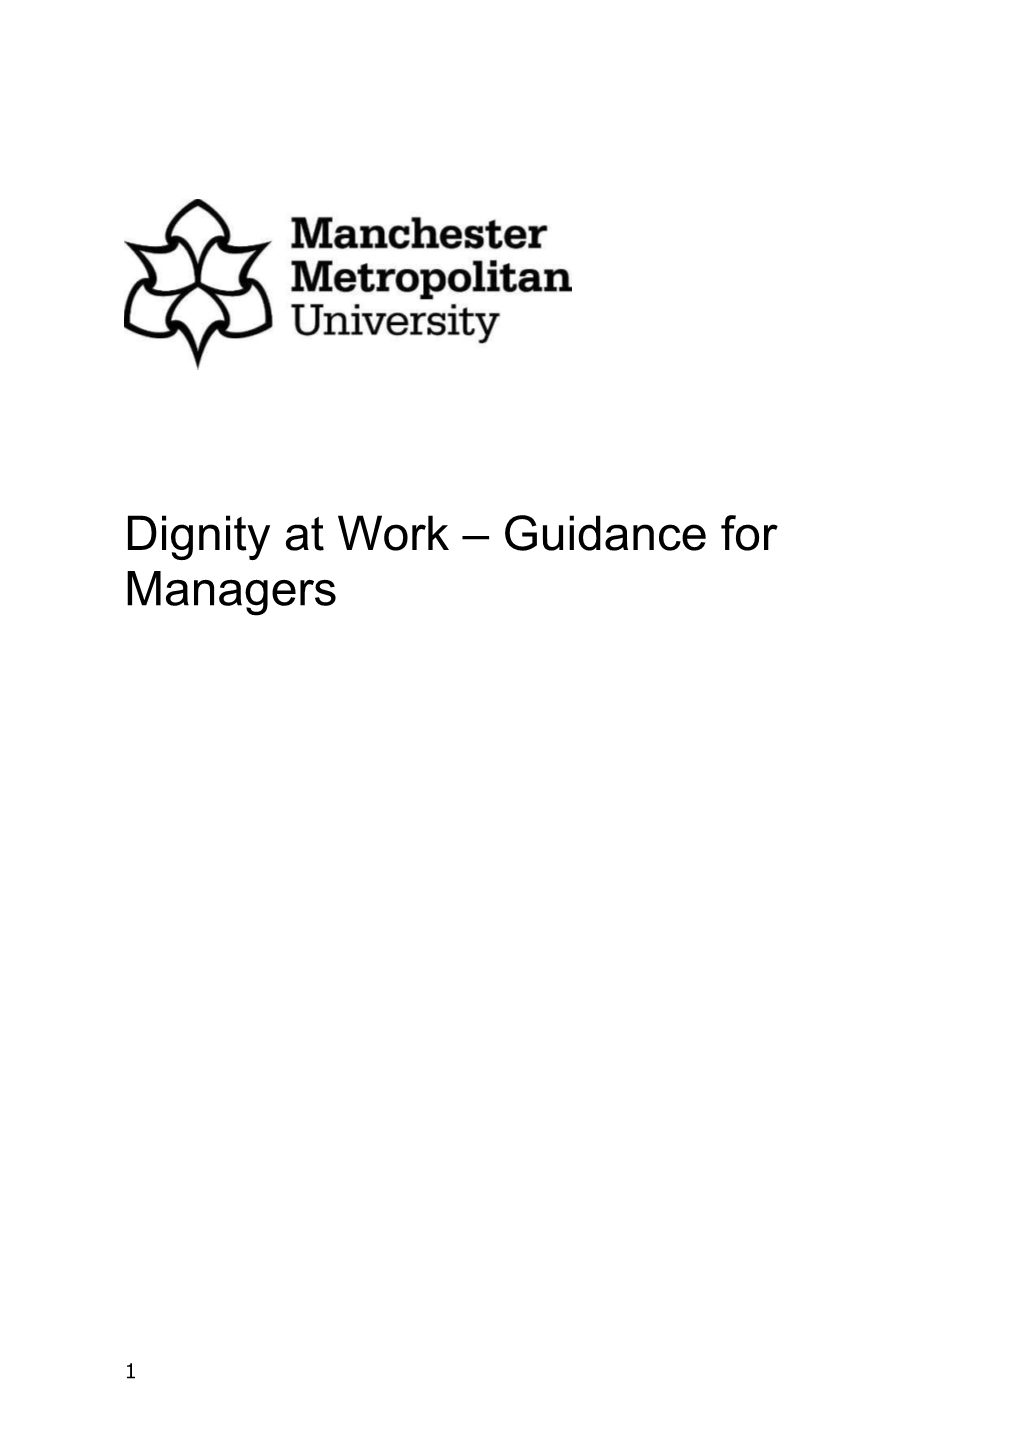 Dignity at Work Guidance for Managers